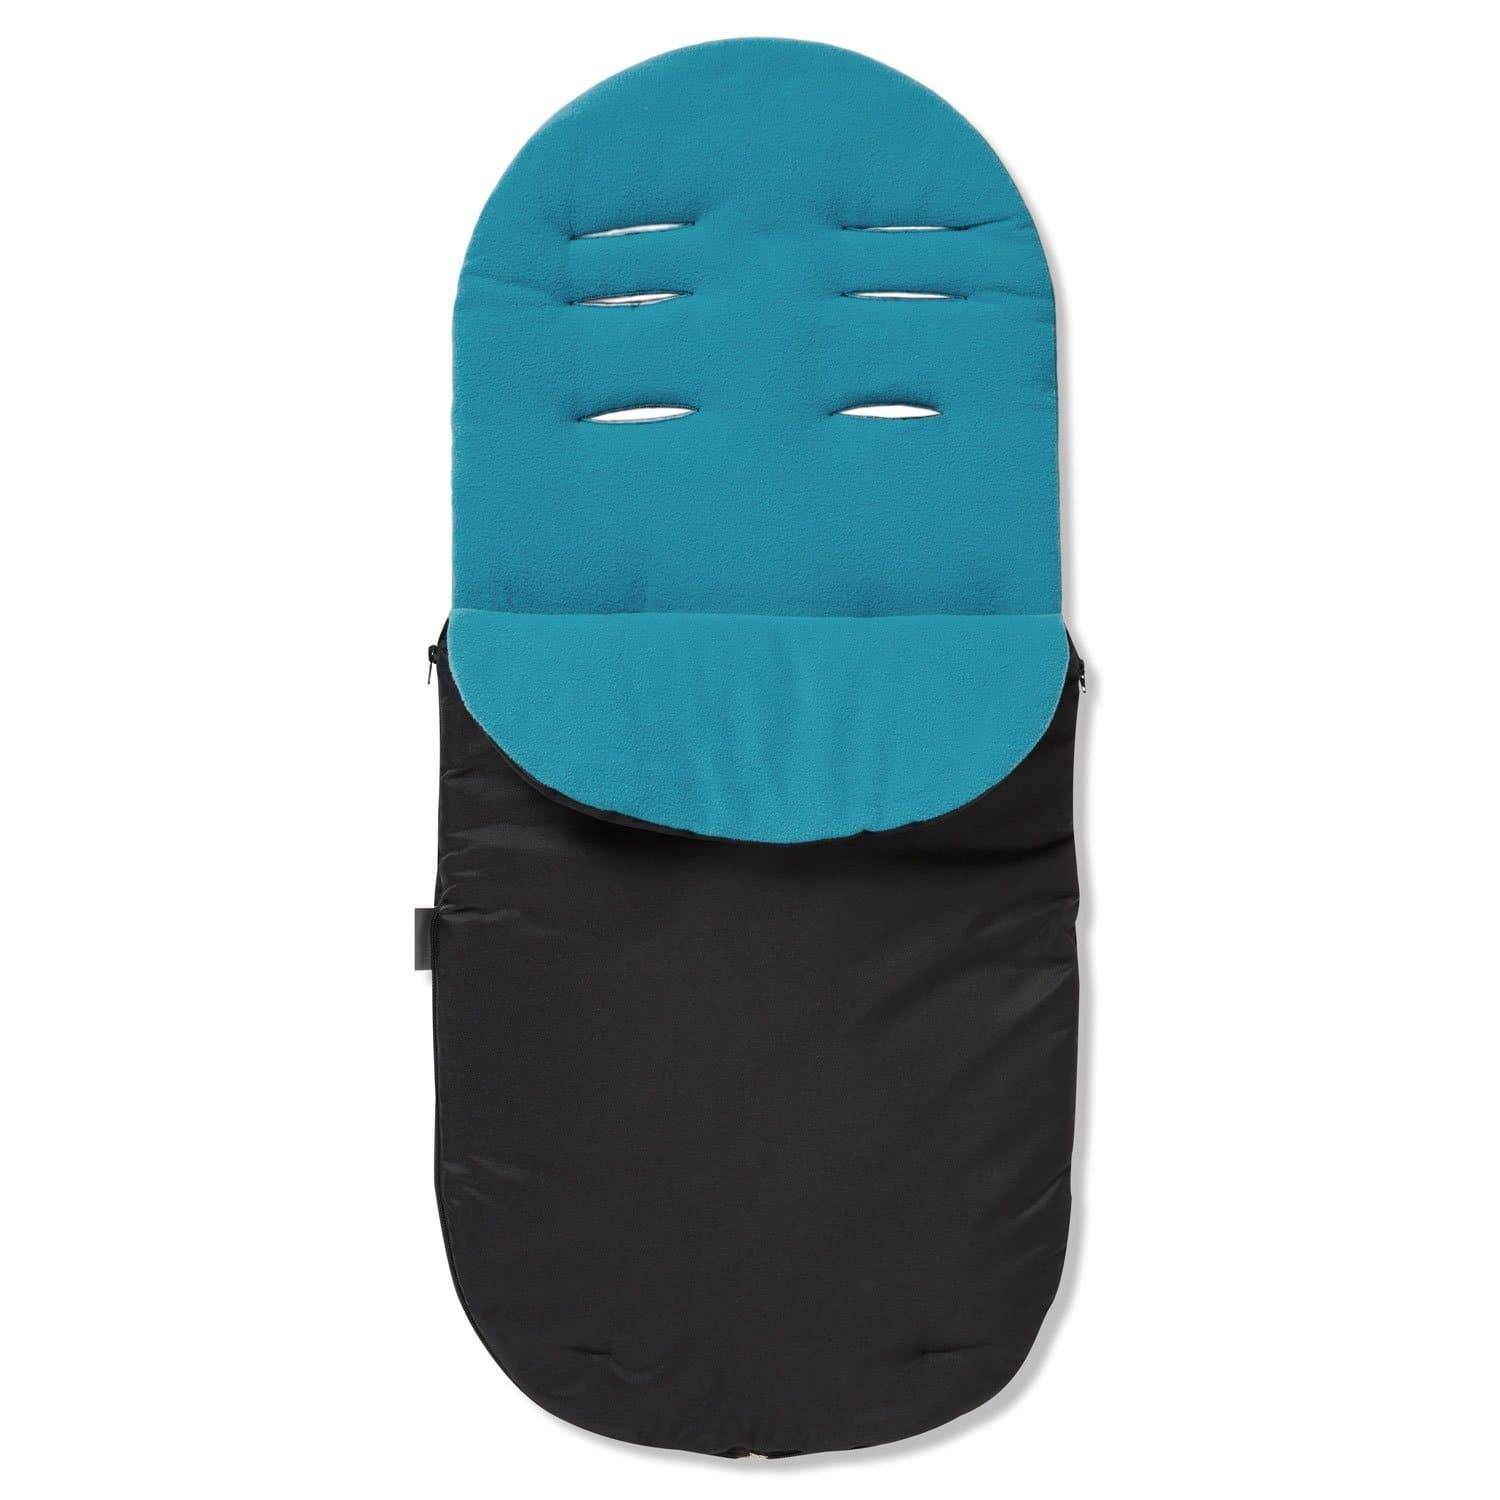 Footmuff / Cosy Toes Compatible with Kiddicare.com - Turquoise / Fits All Models | For Your Little One